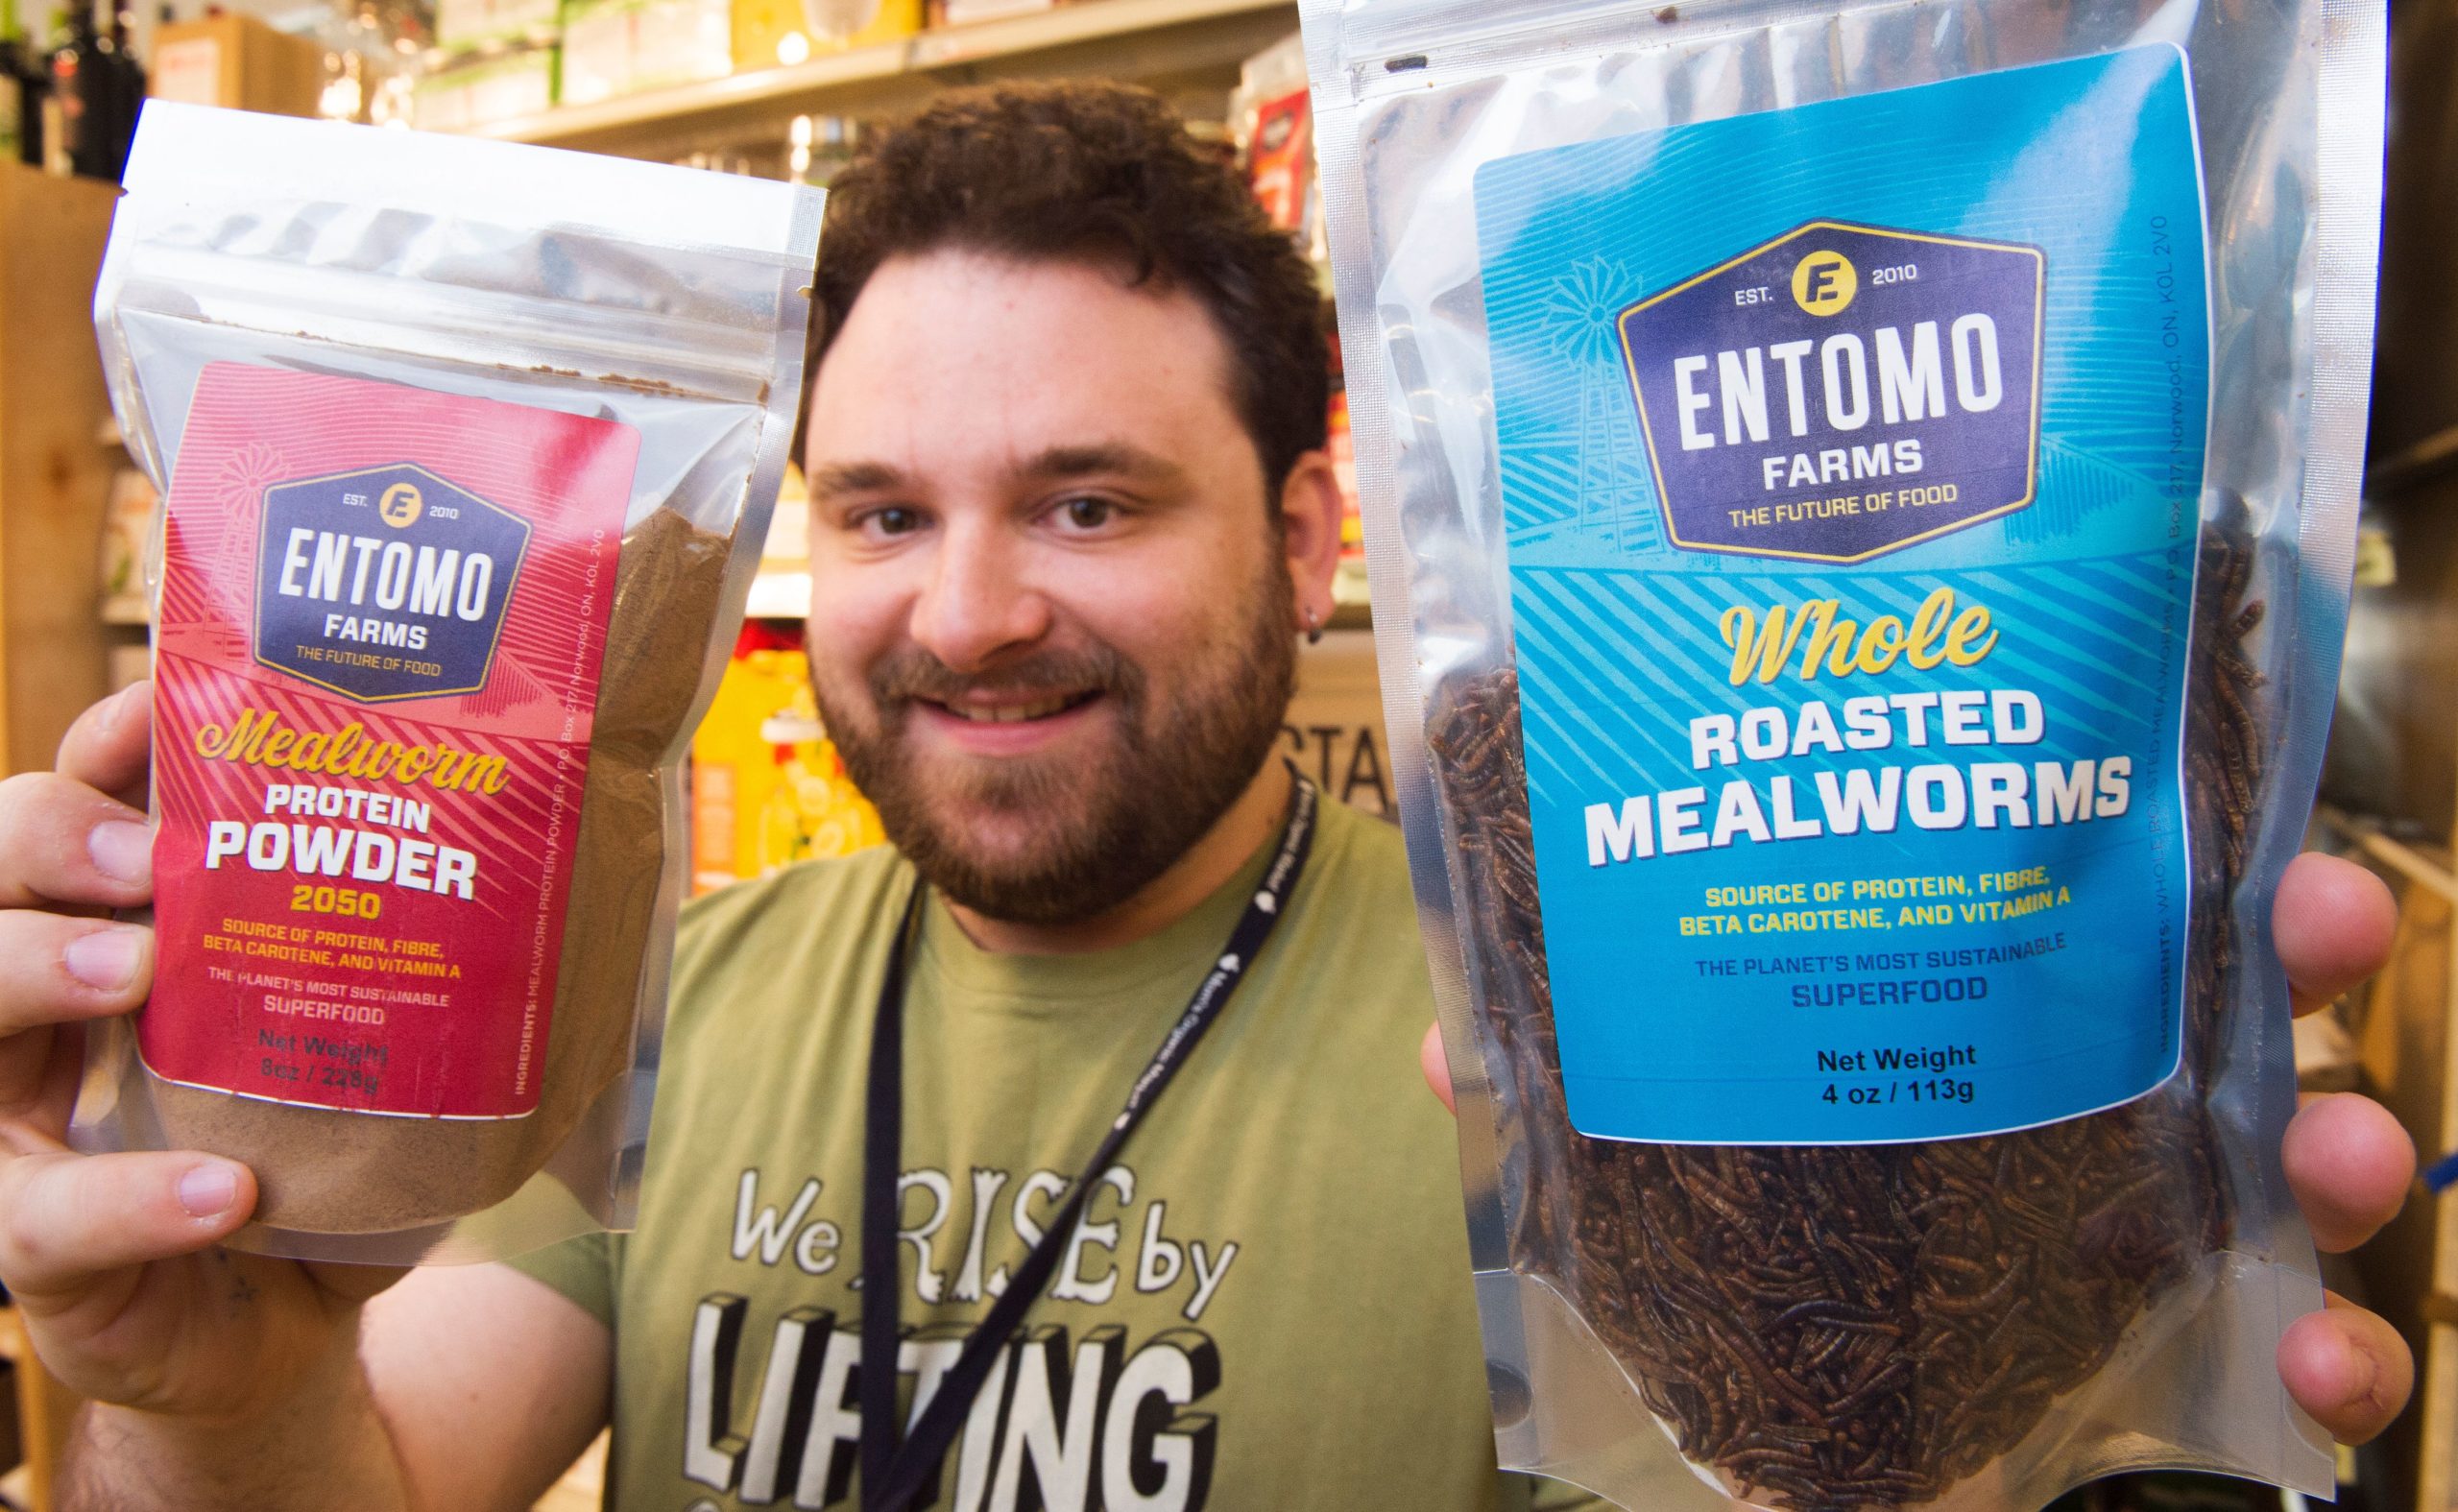 Kyle Morgan, Grocery Manager at MOM's Organic Market in Washington, DC, holds bags of Mealworm Protein Powder and Whole Mealworms on April 12, 2017. (Photo by PAUL J. RICHARDS/AFP via Getty Images)